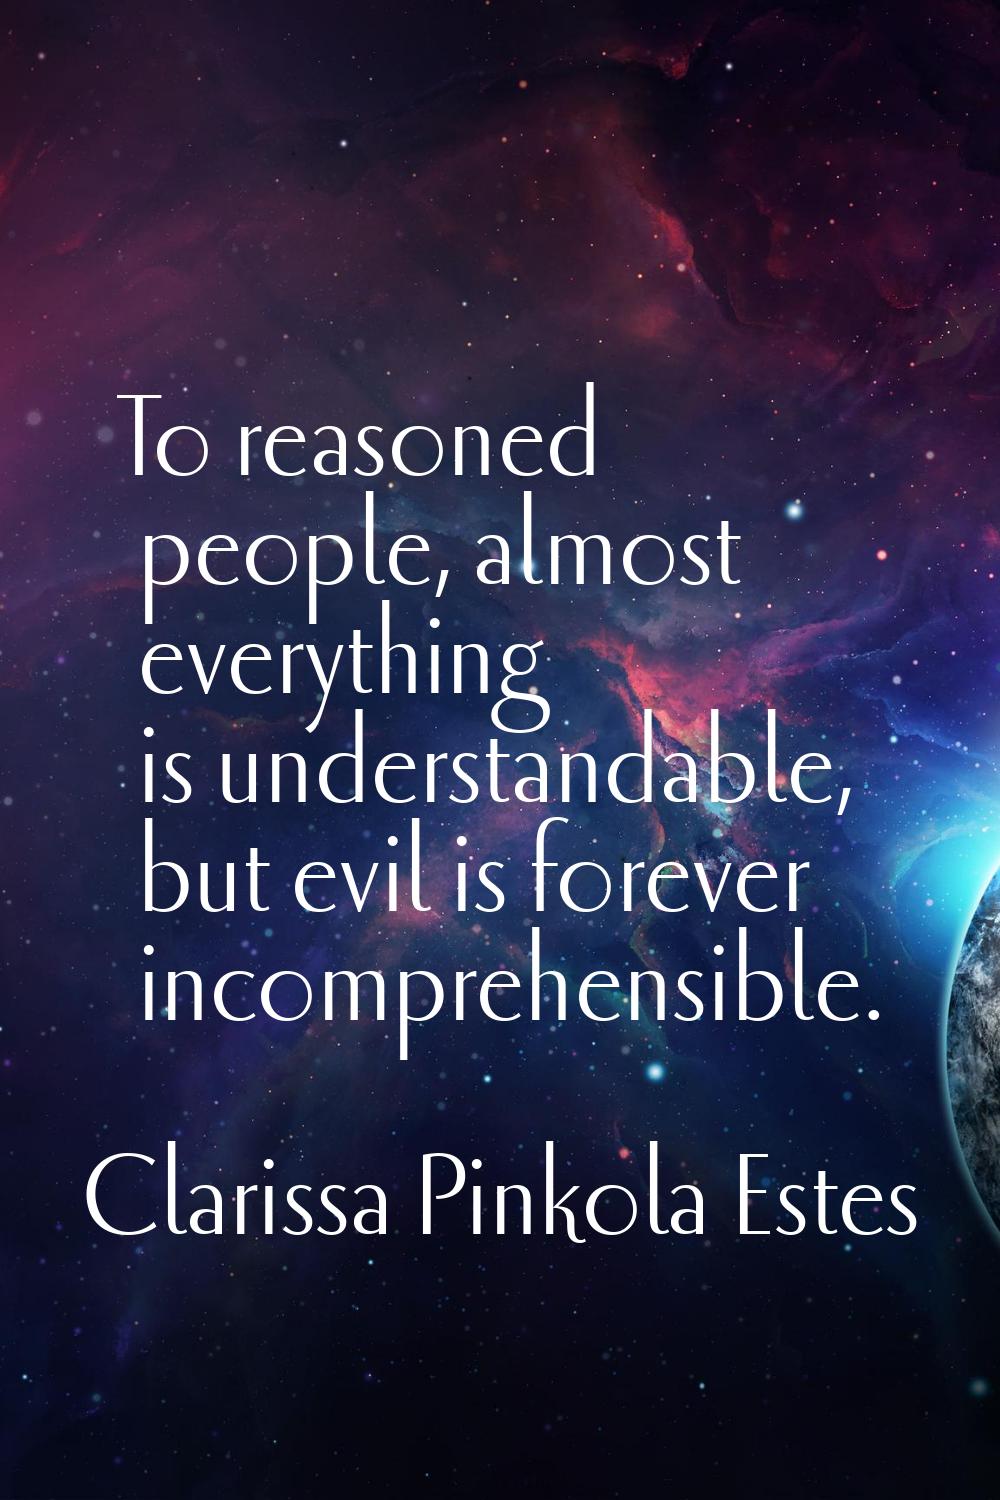 To reasoned people, almost everything is understandable, but evil is forever incomprehensible.